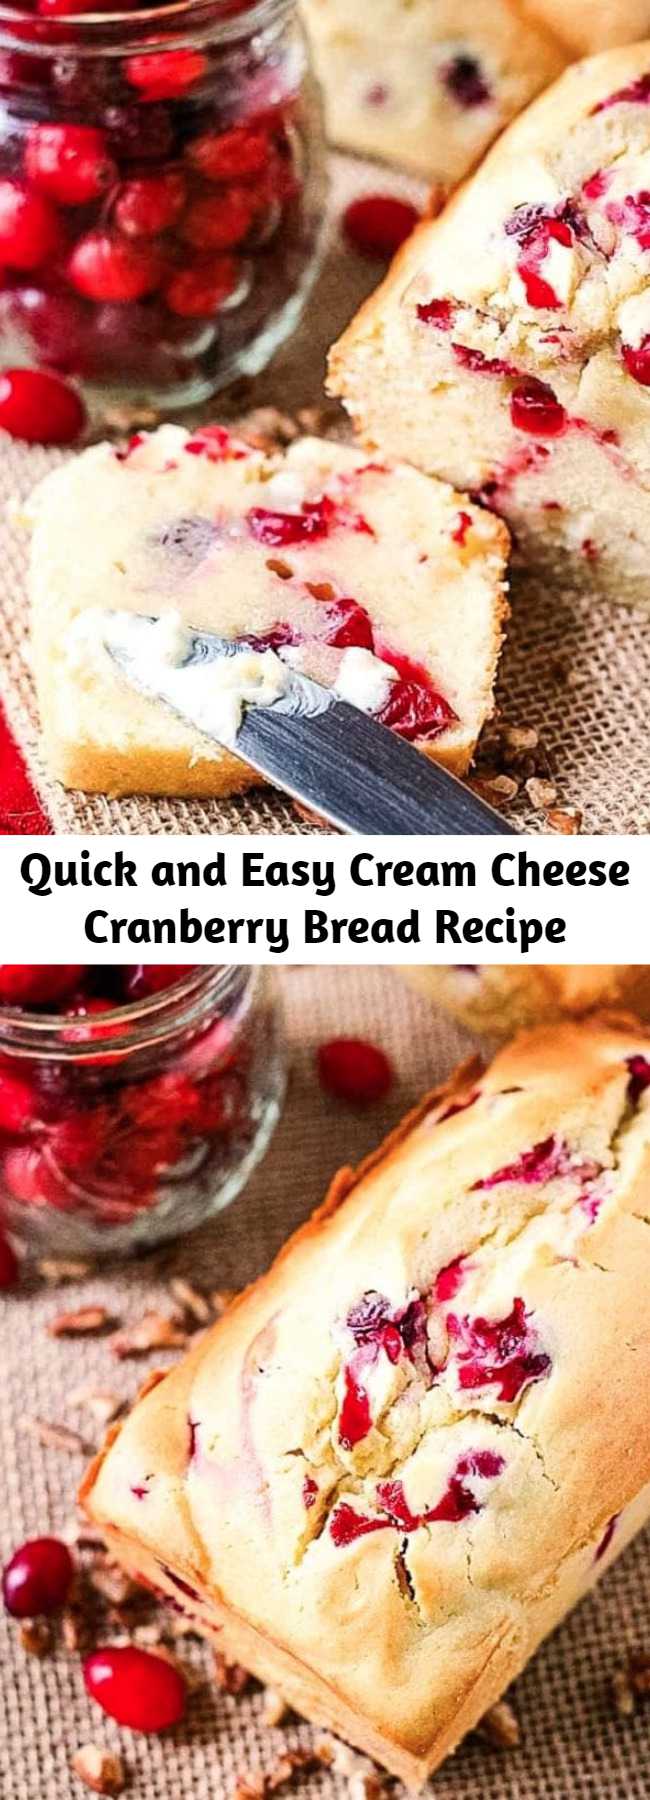 Quick and Easy Cream Cheese Cranberry Bread Recipe - This sweet cream cheese bread compliments the tart cranberries it's loading with resulting in an amazing Cream Cheese Cranberry Bread! If you are looking for a new quick bread recipe that is perfect for the fall and Thanksgiving you have found it. It's so amazingly soft and tender, plus quick and easy to make. I love a big slice with butter and a mug of coffee or for a quick snack in the afternoon! #cranberry #bread